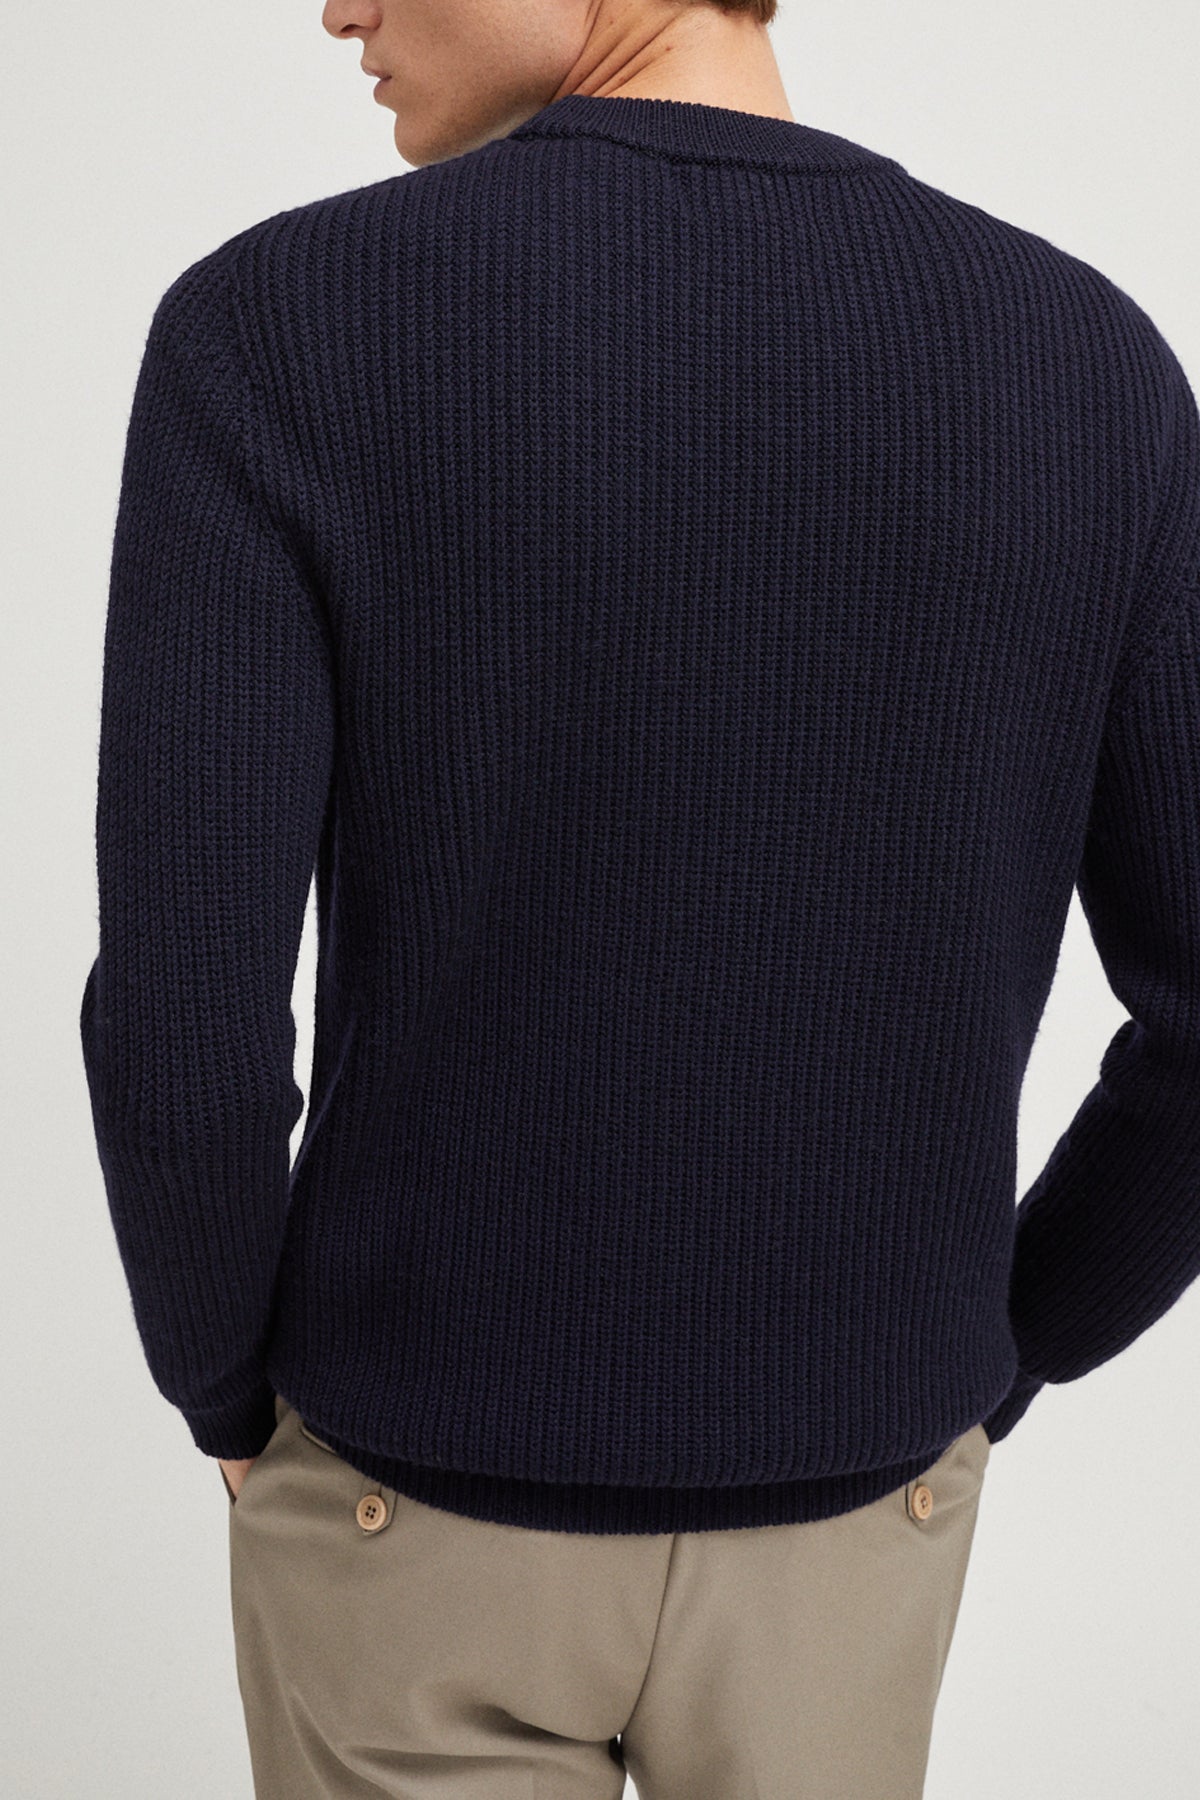 Oxford Blue | The Merino Wool Perkins Sweater – Imperfect Version